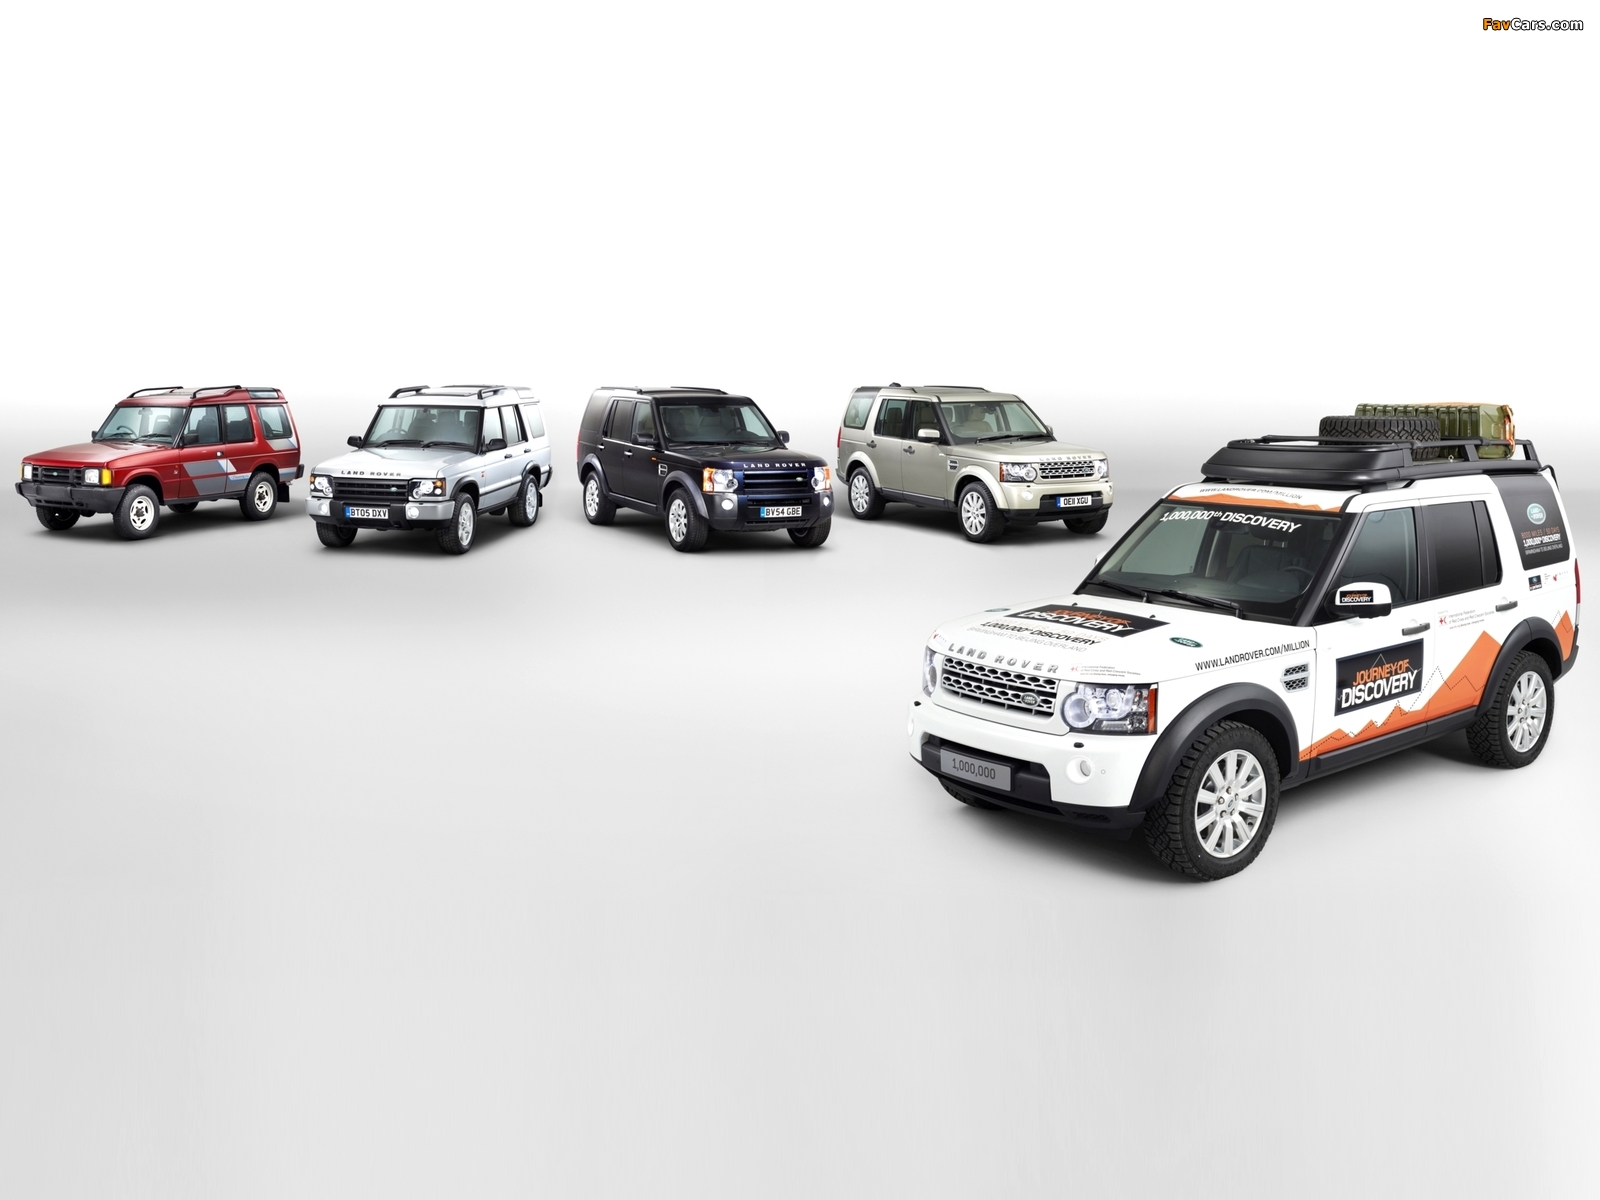 Images of Land Rover Discovery (1600 x 1200)